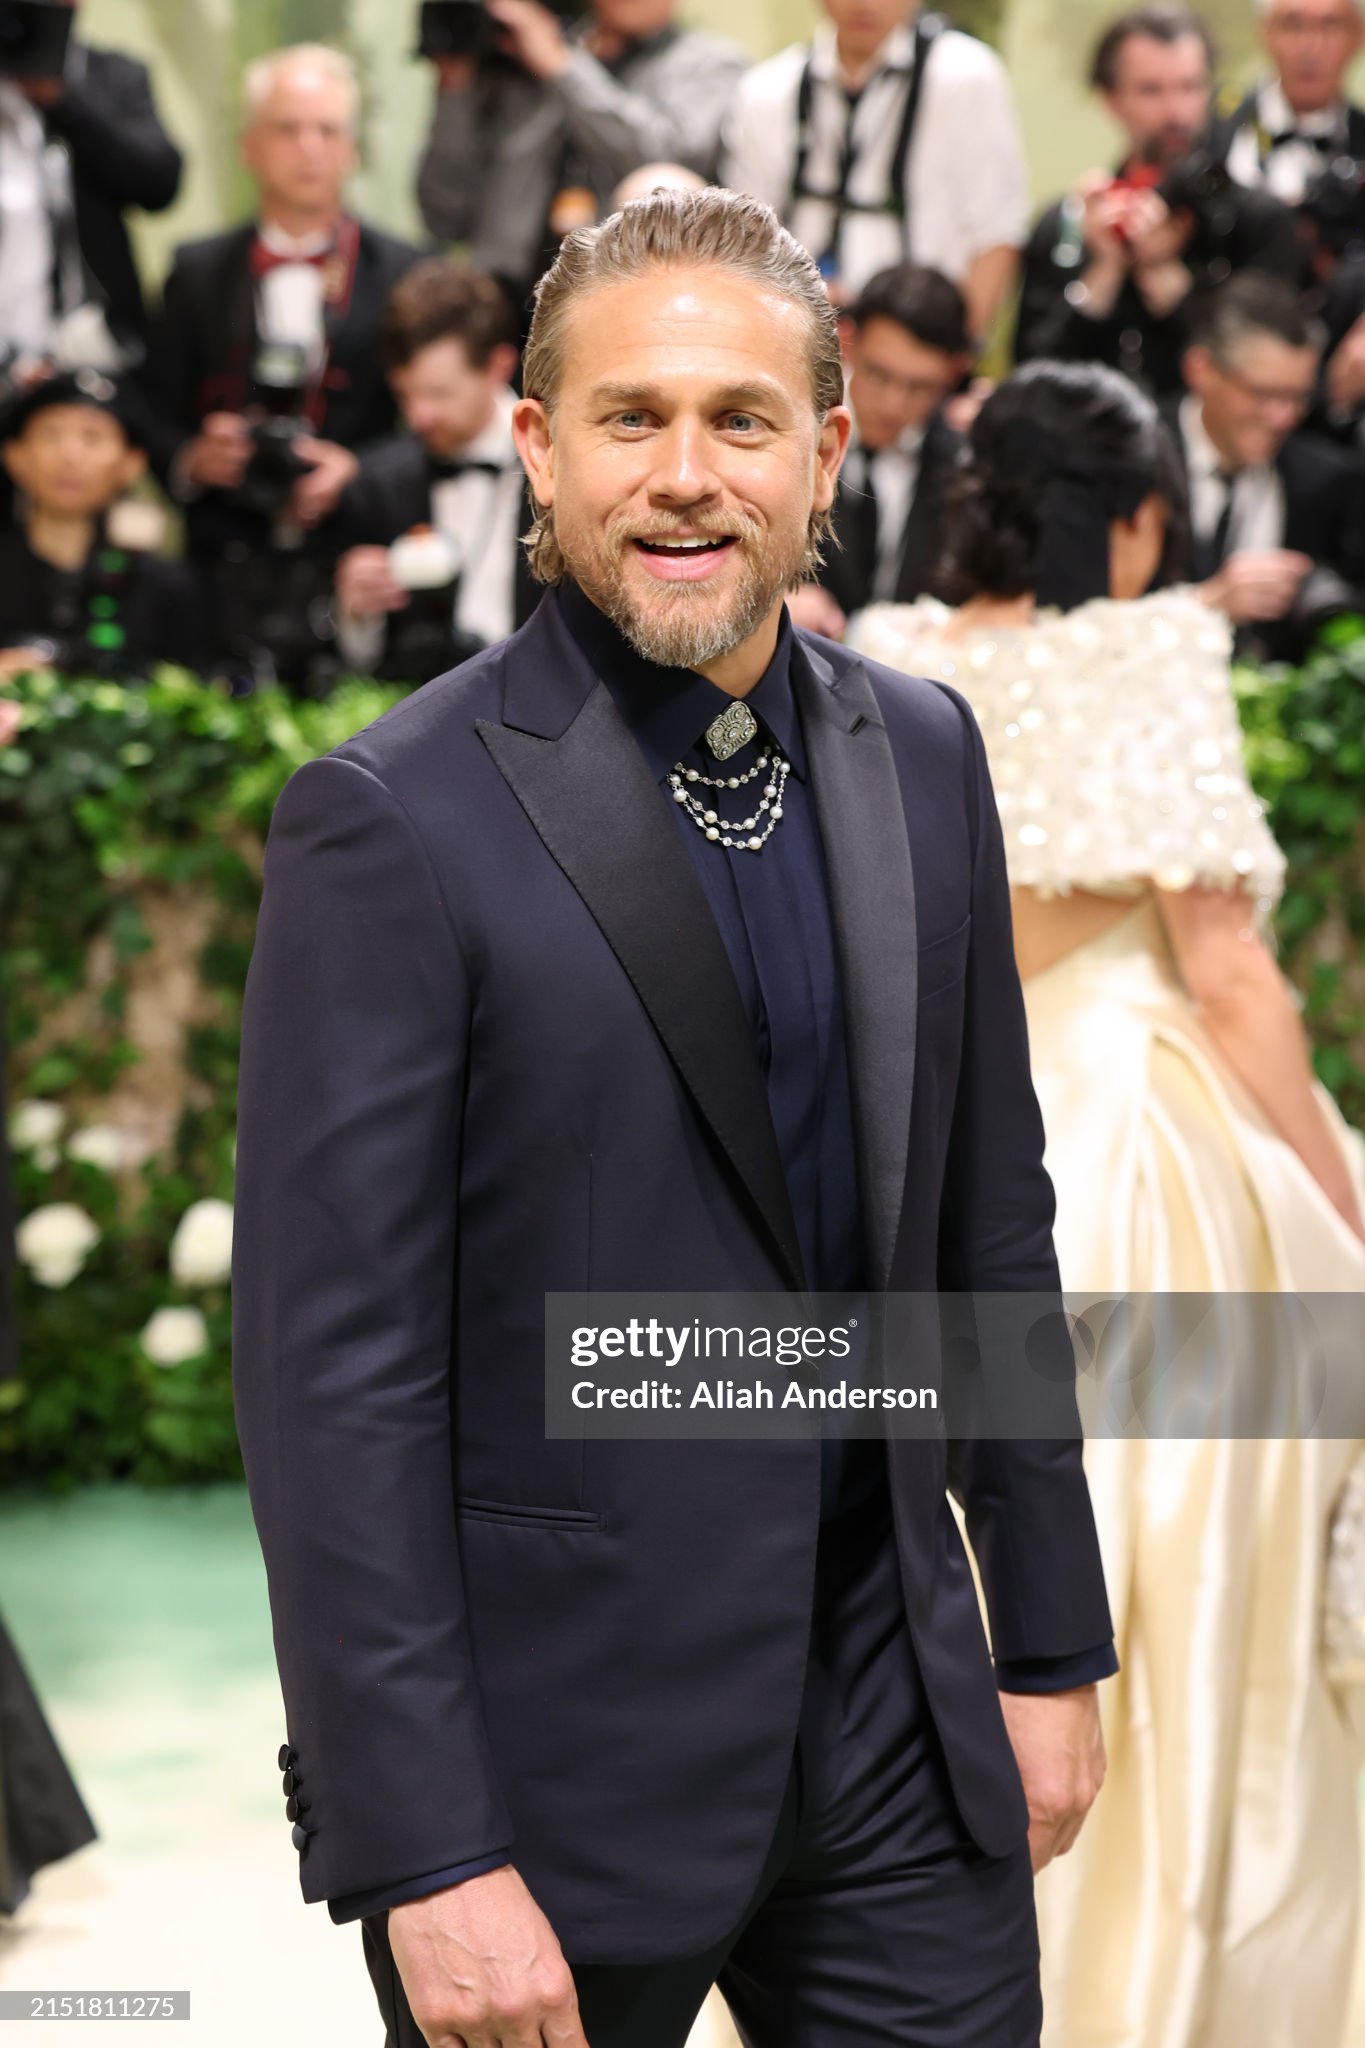 gettyimages-2151811275-2048x2048.jpg